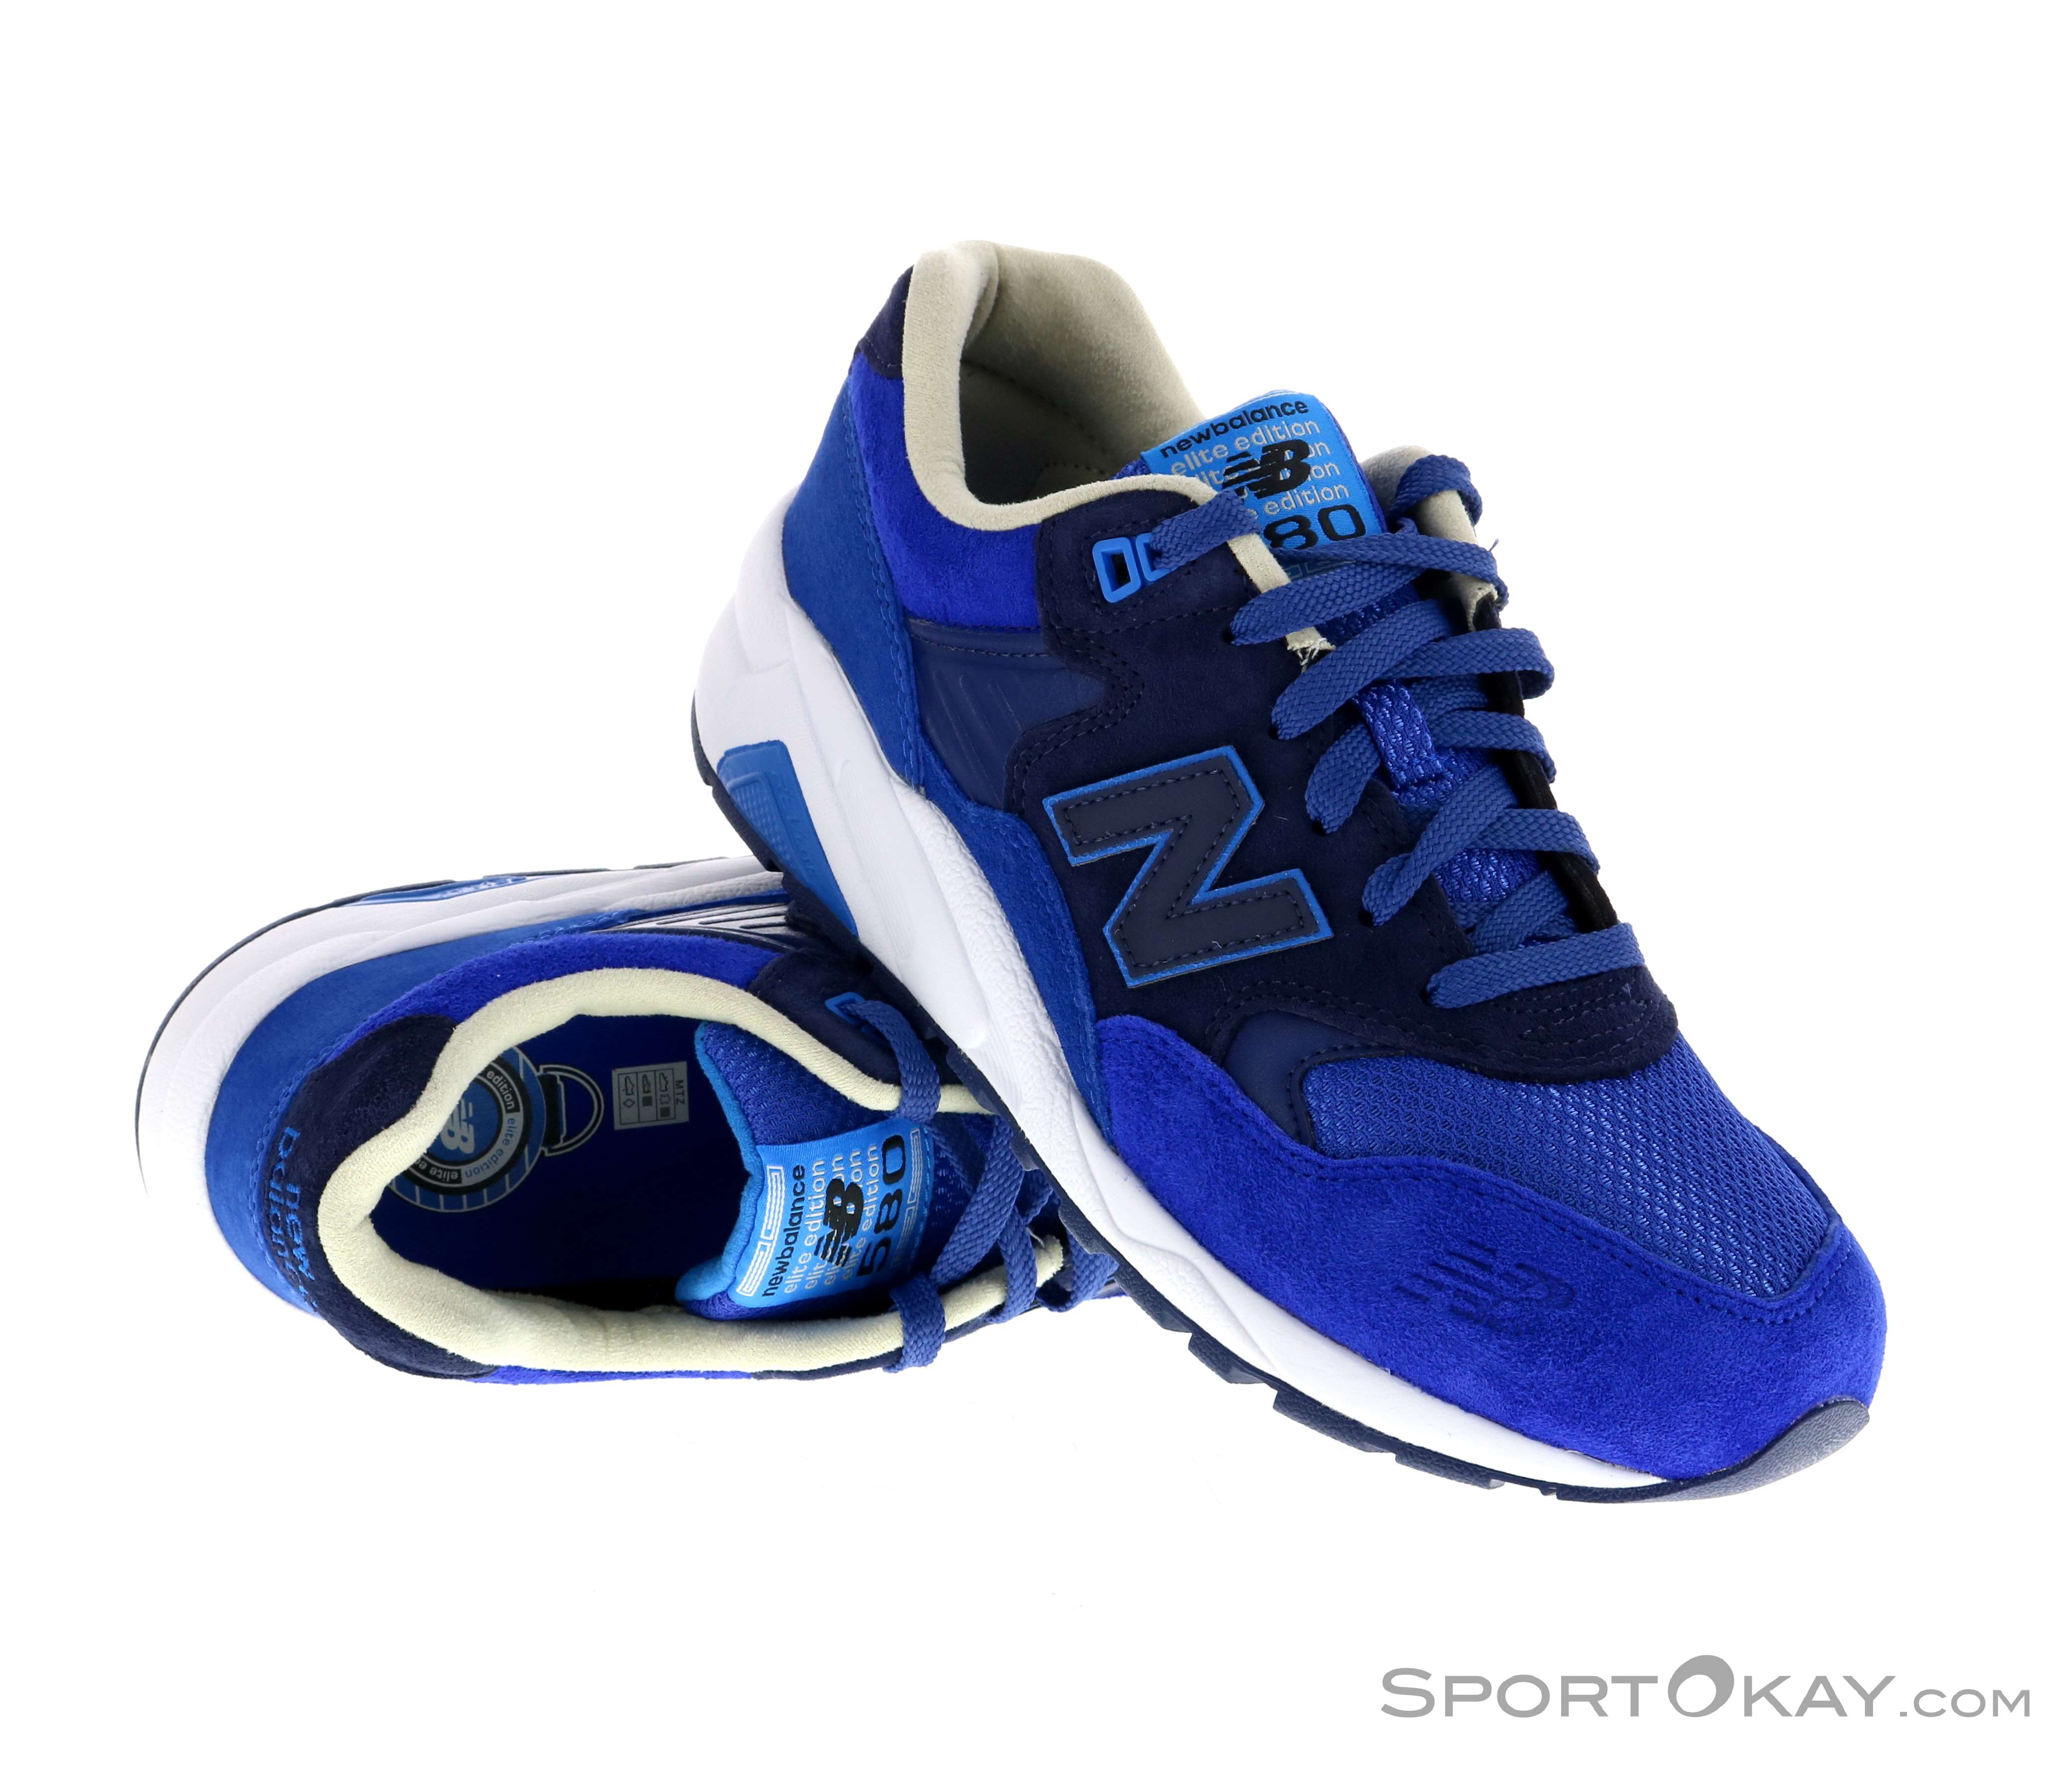 interference Misunderstanding Interaction New Balance 580 Elite Paper Lights Mens Leisure Shoes - Leisure Shoes -  Shoes & Poles - Outdoor - All